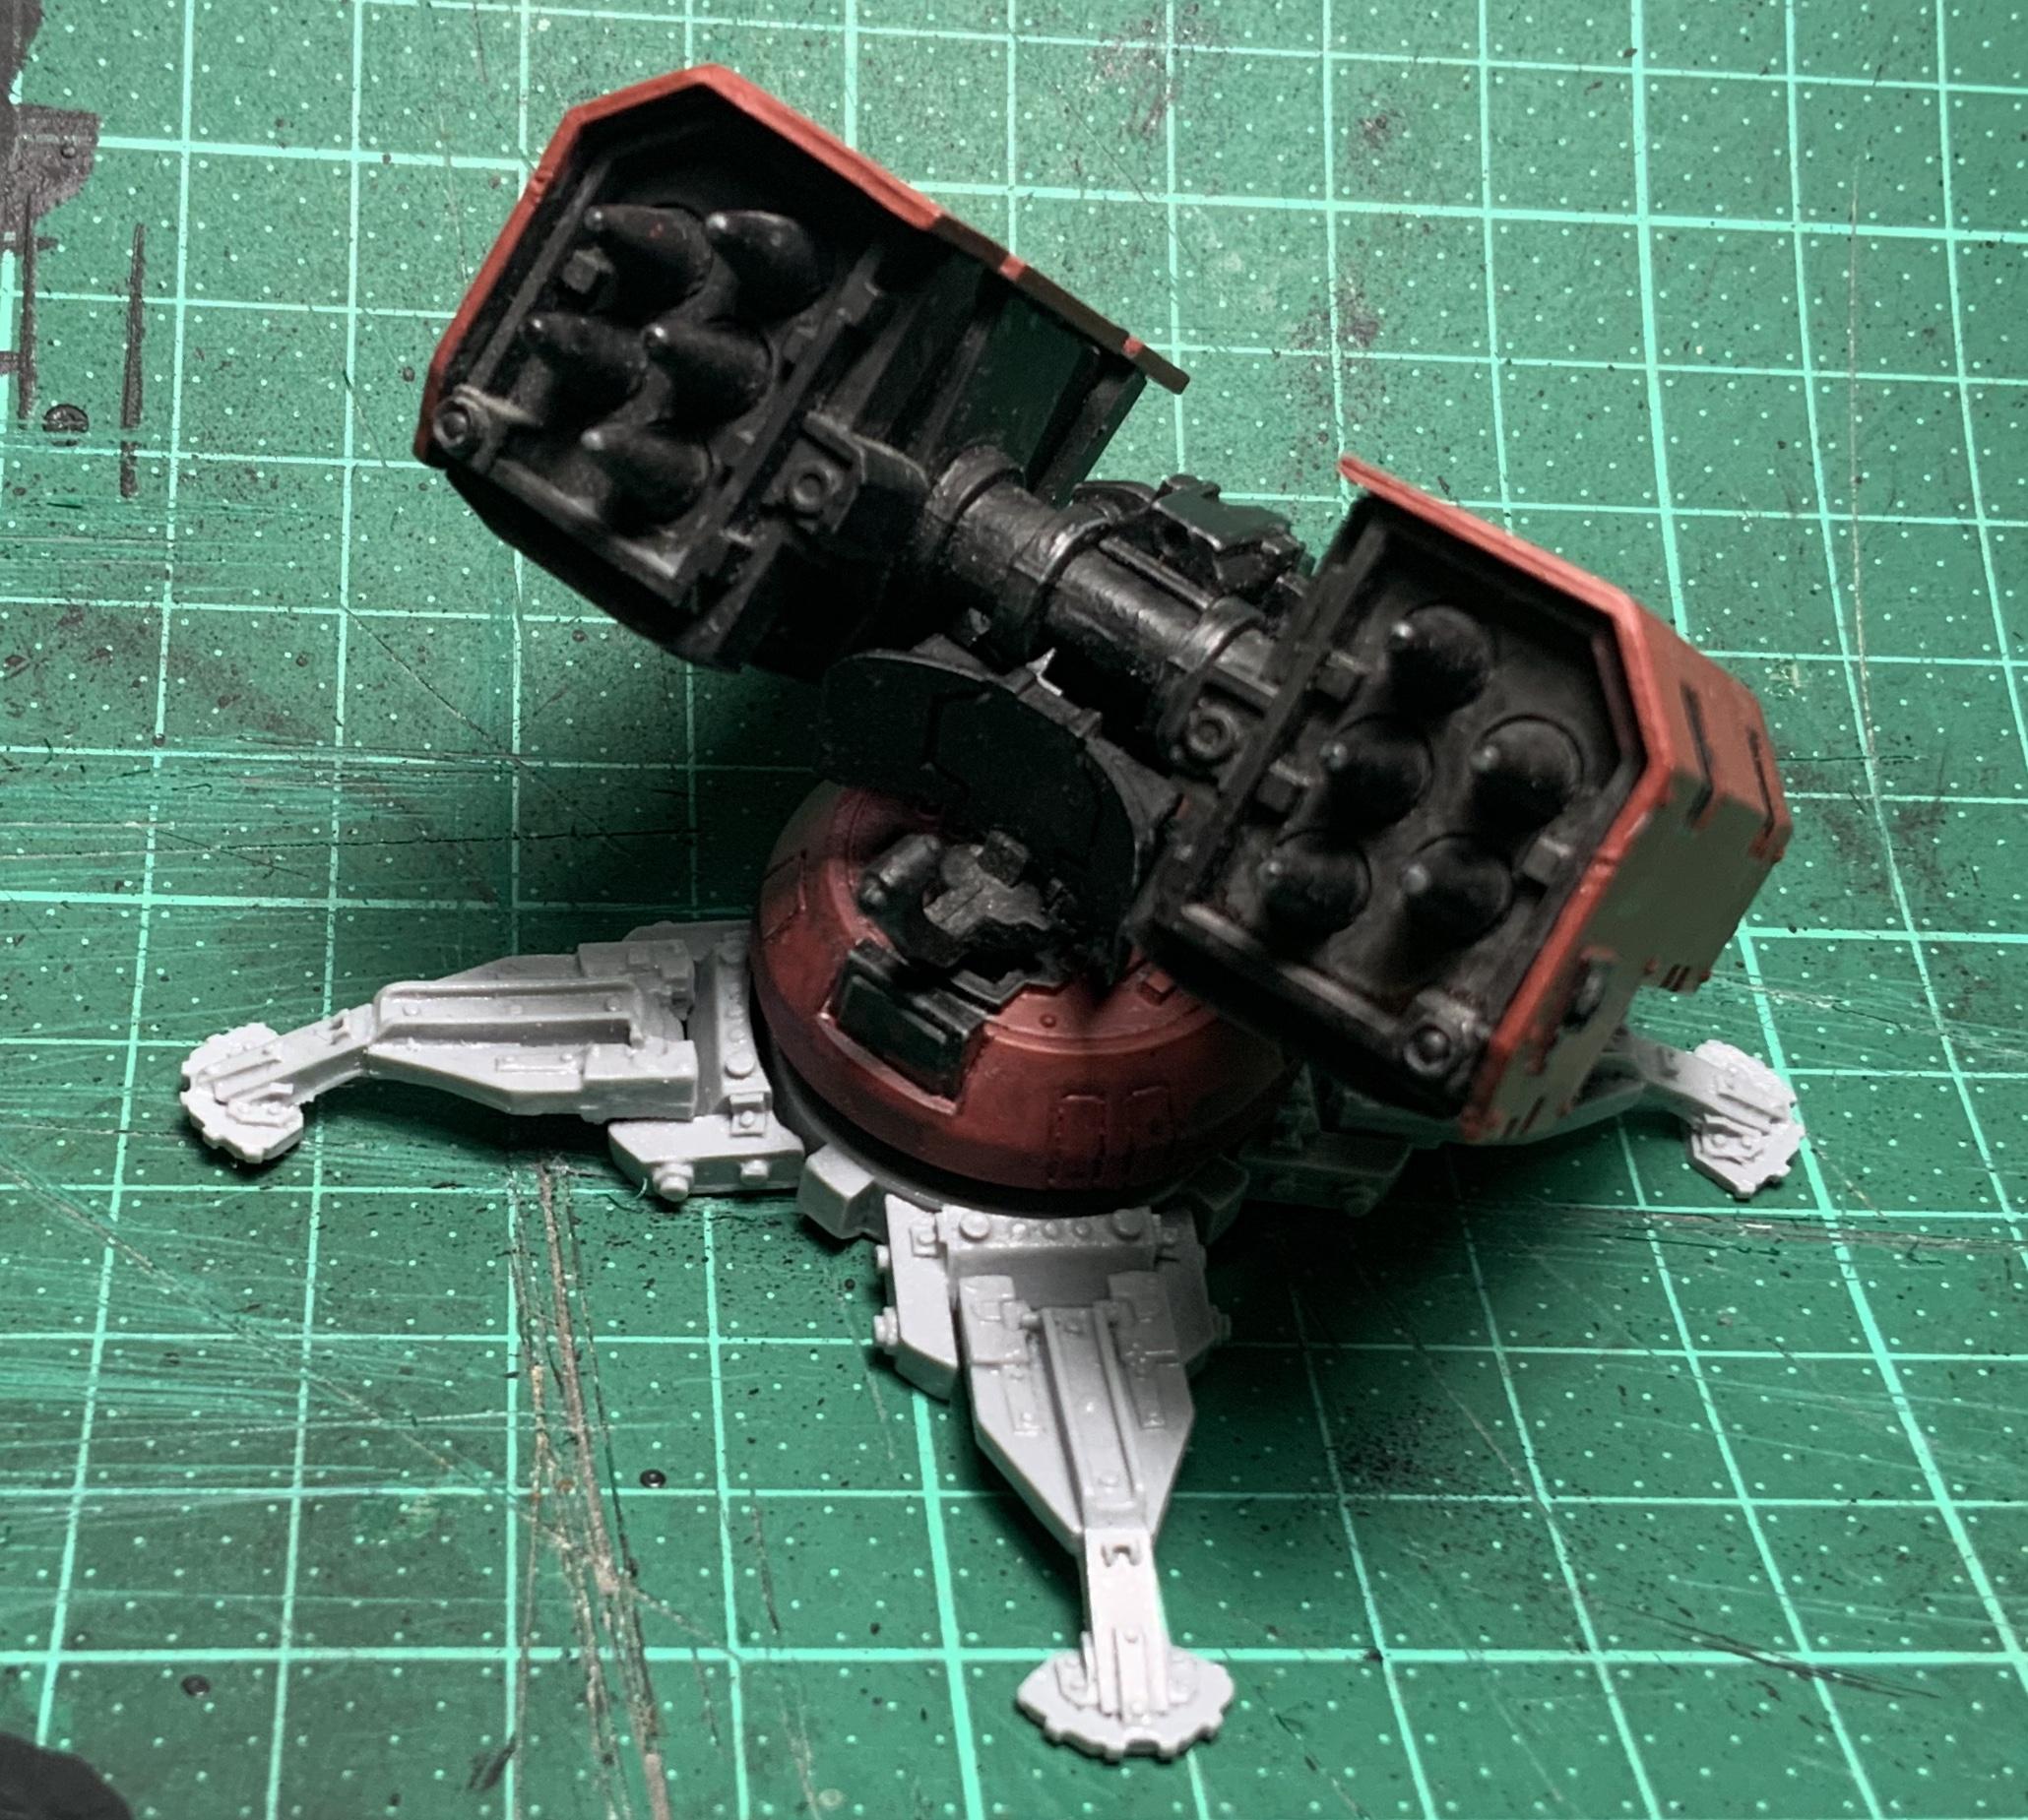 dry fitting a whilwind launcher on tarantula legs